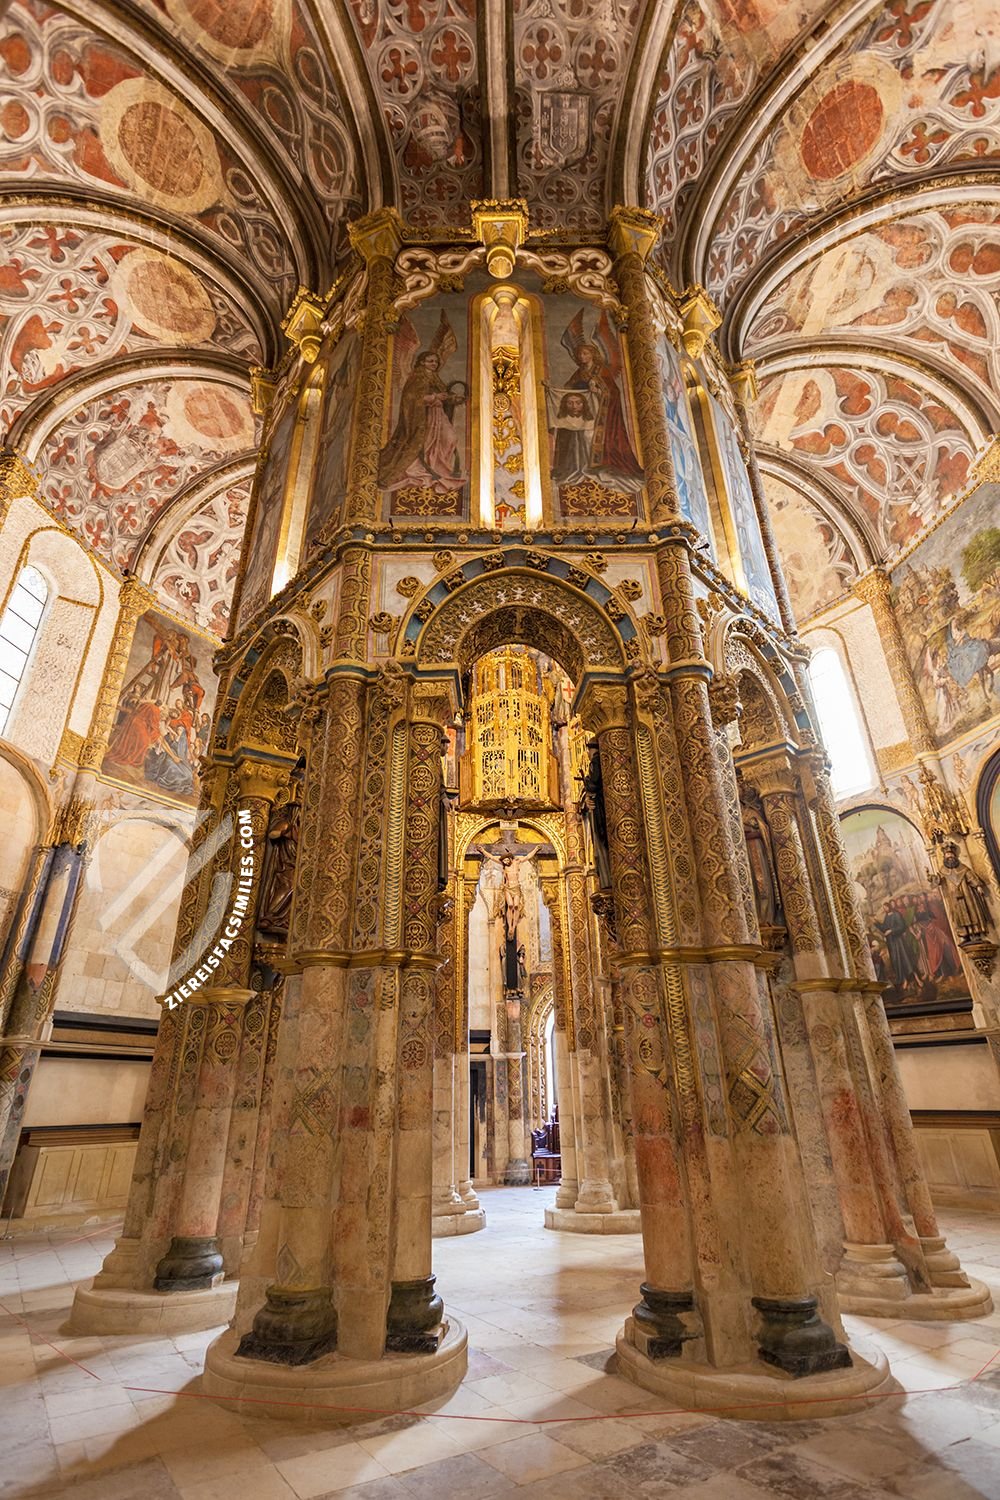 The Convent of Christ in Tomar - Main church (Source: iStock/saiko3p)